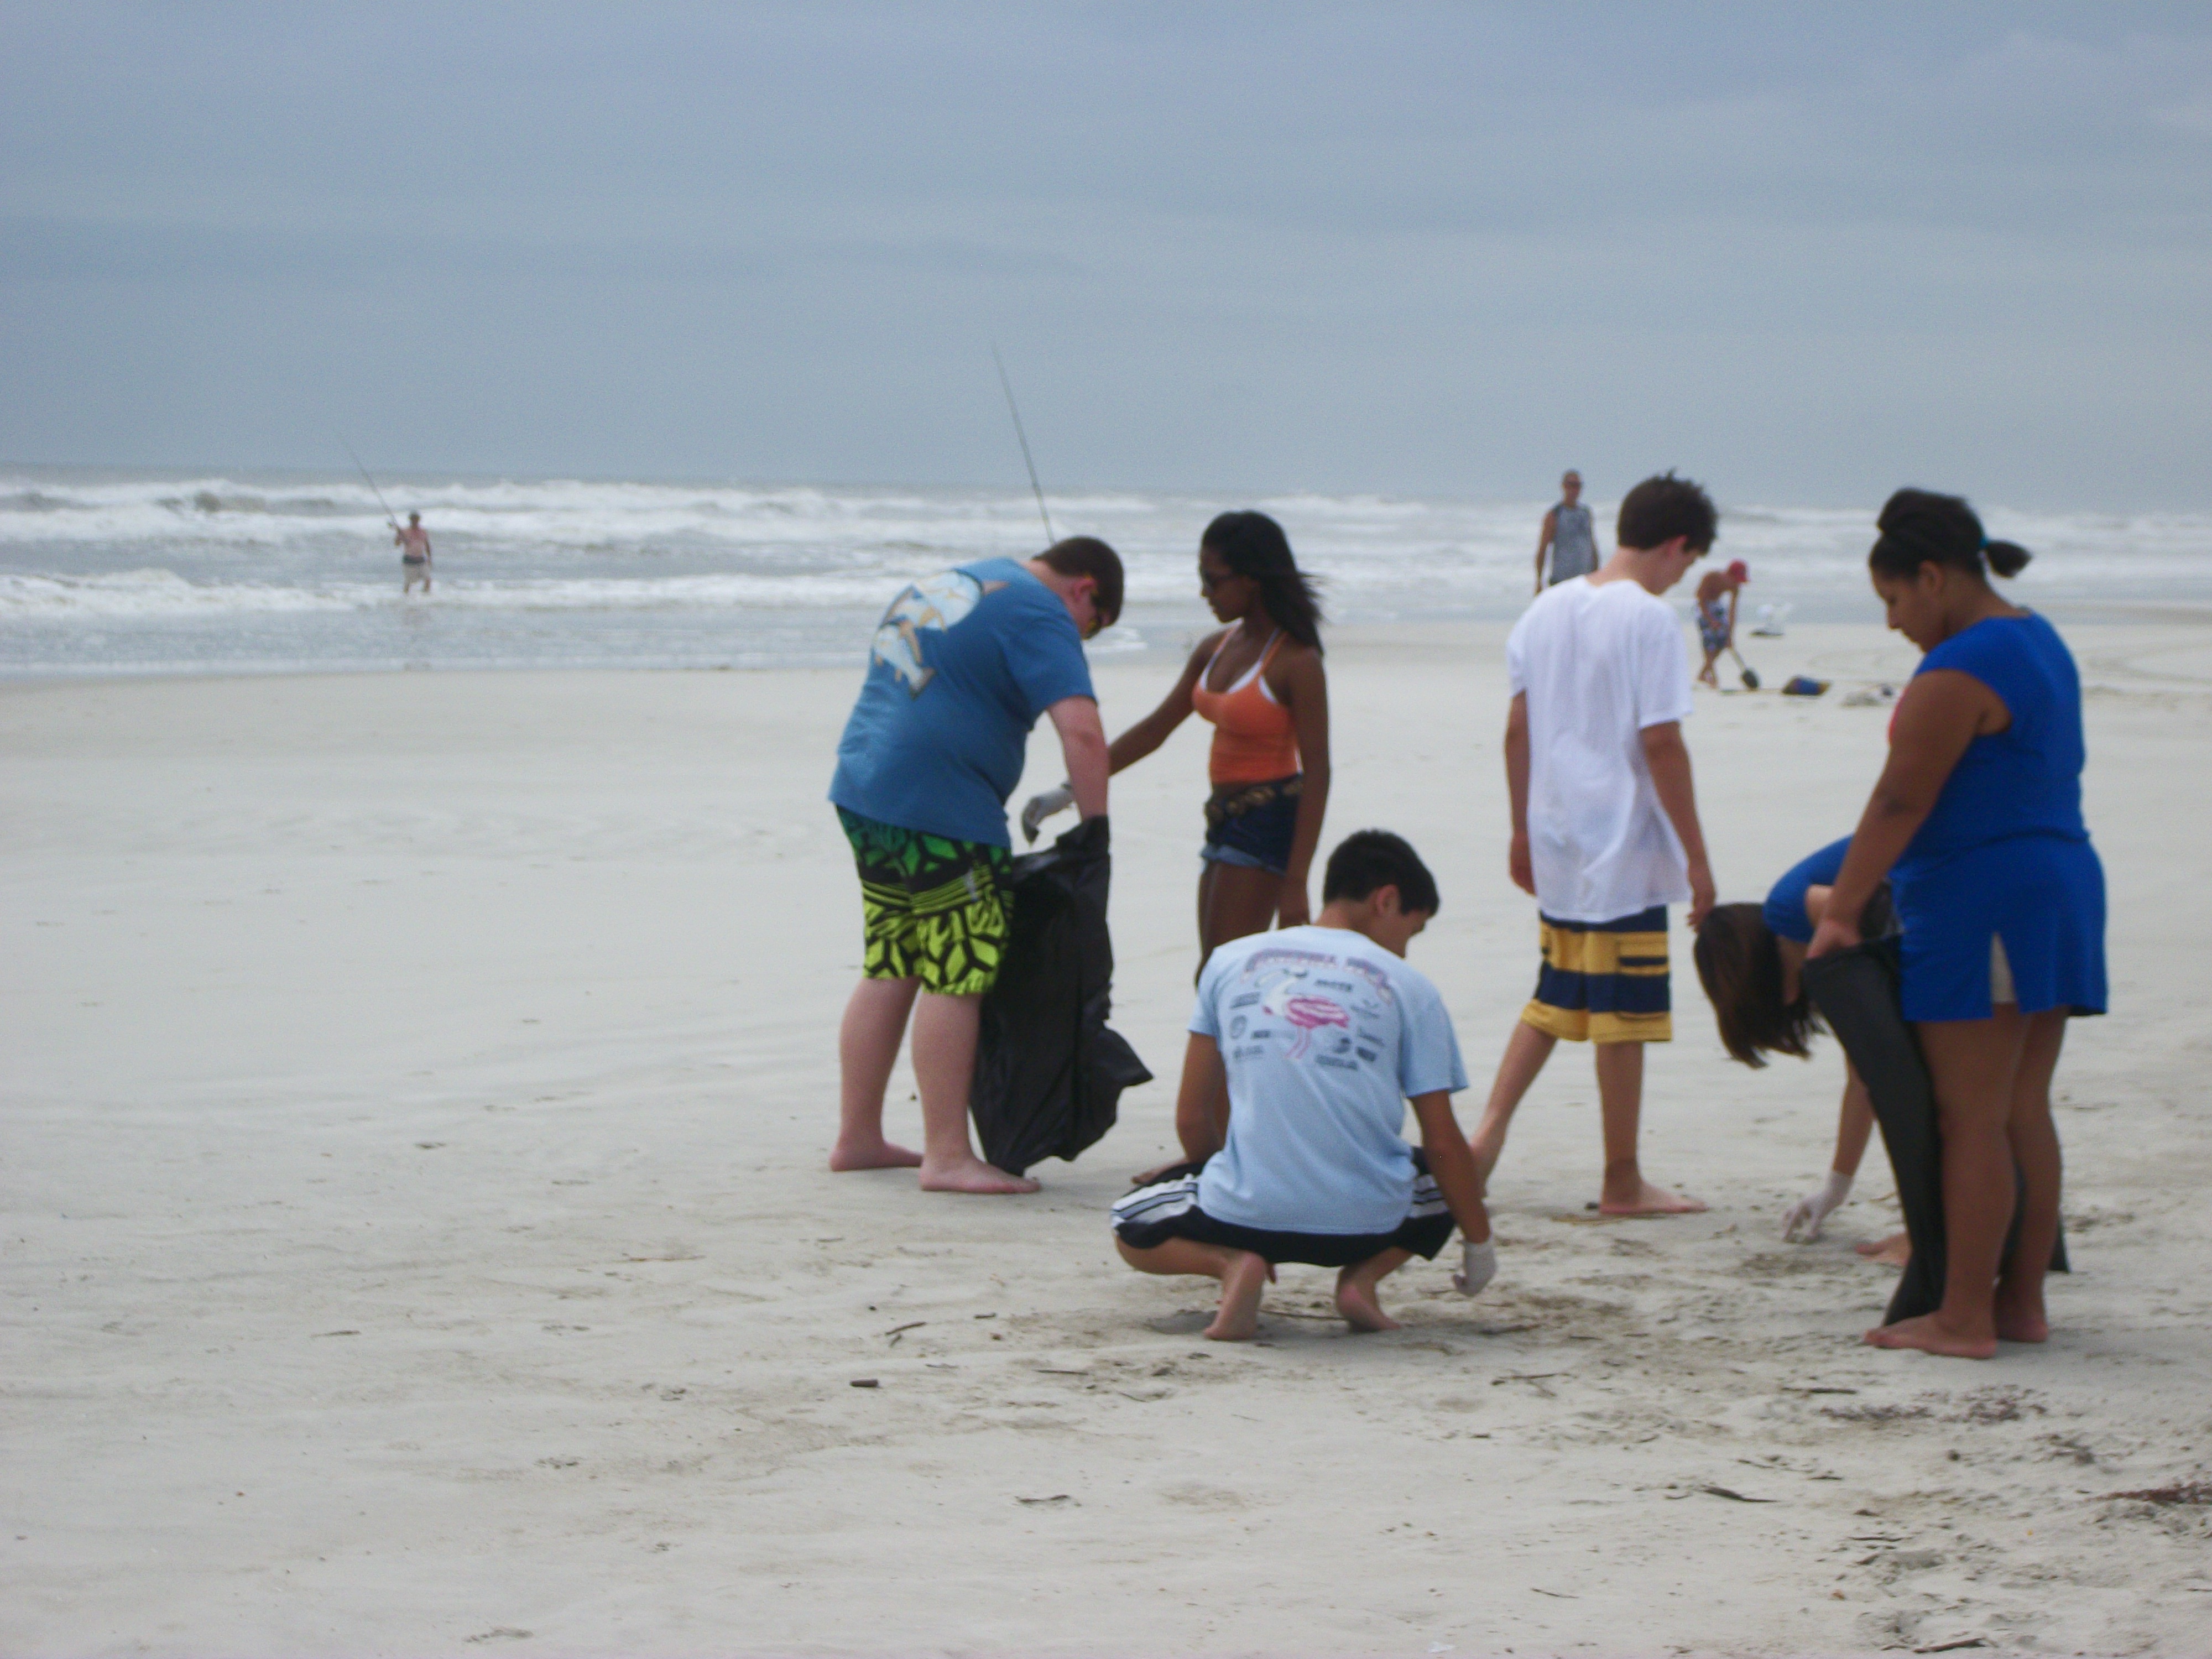 Student volunteering abroad on the beach.